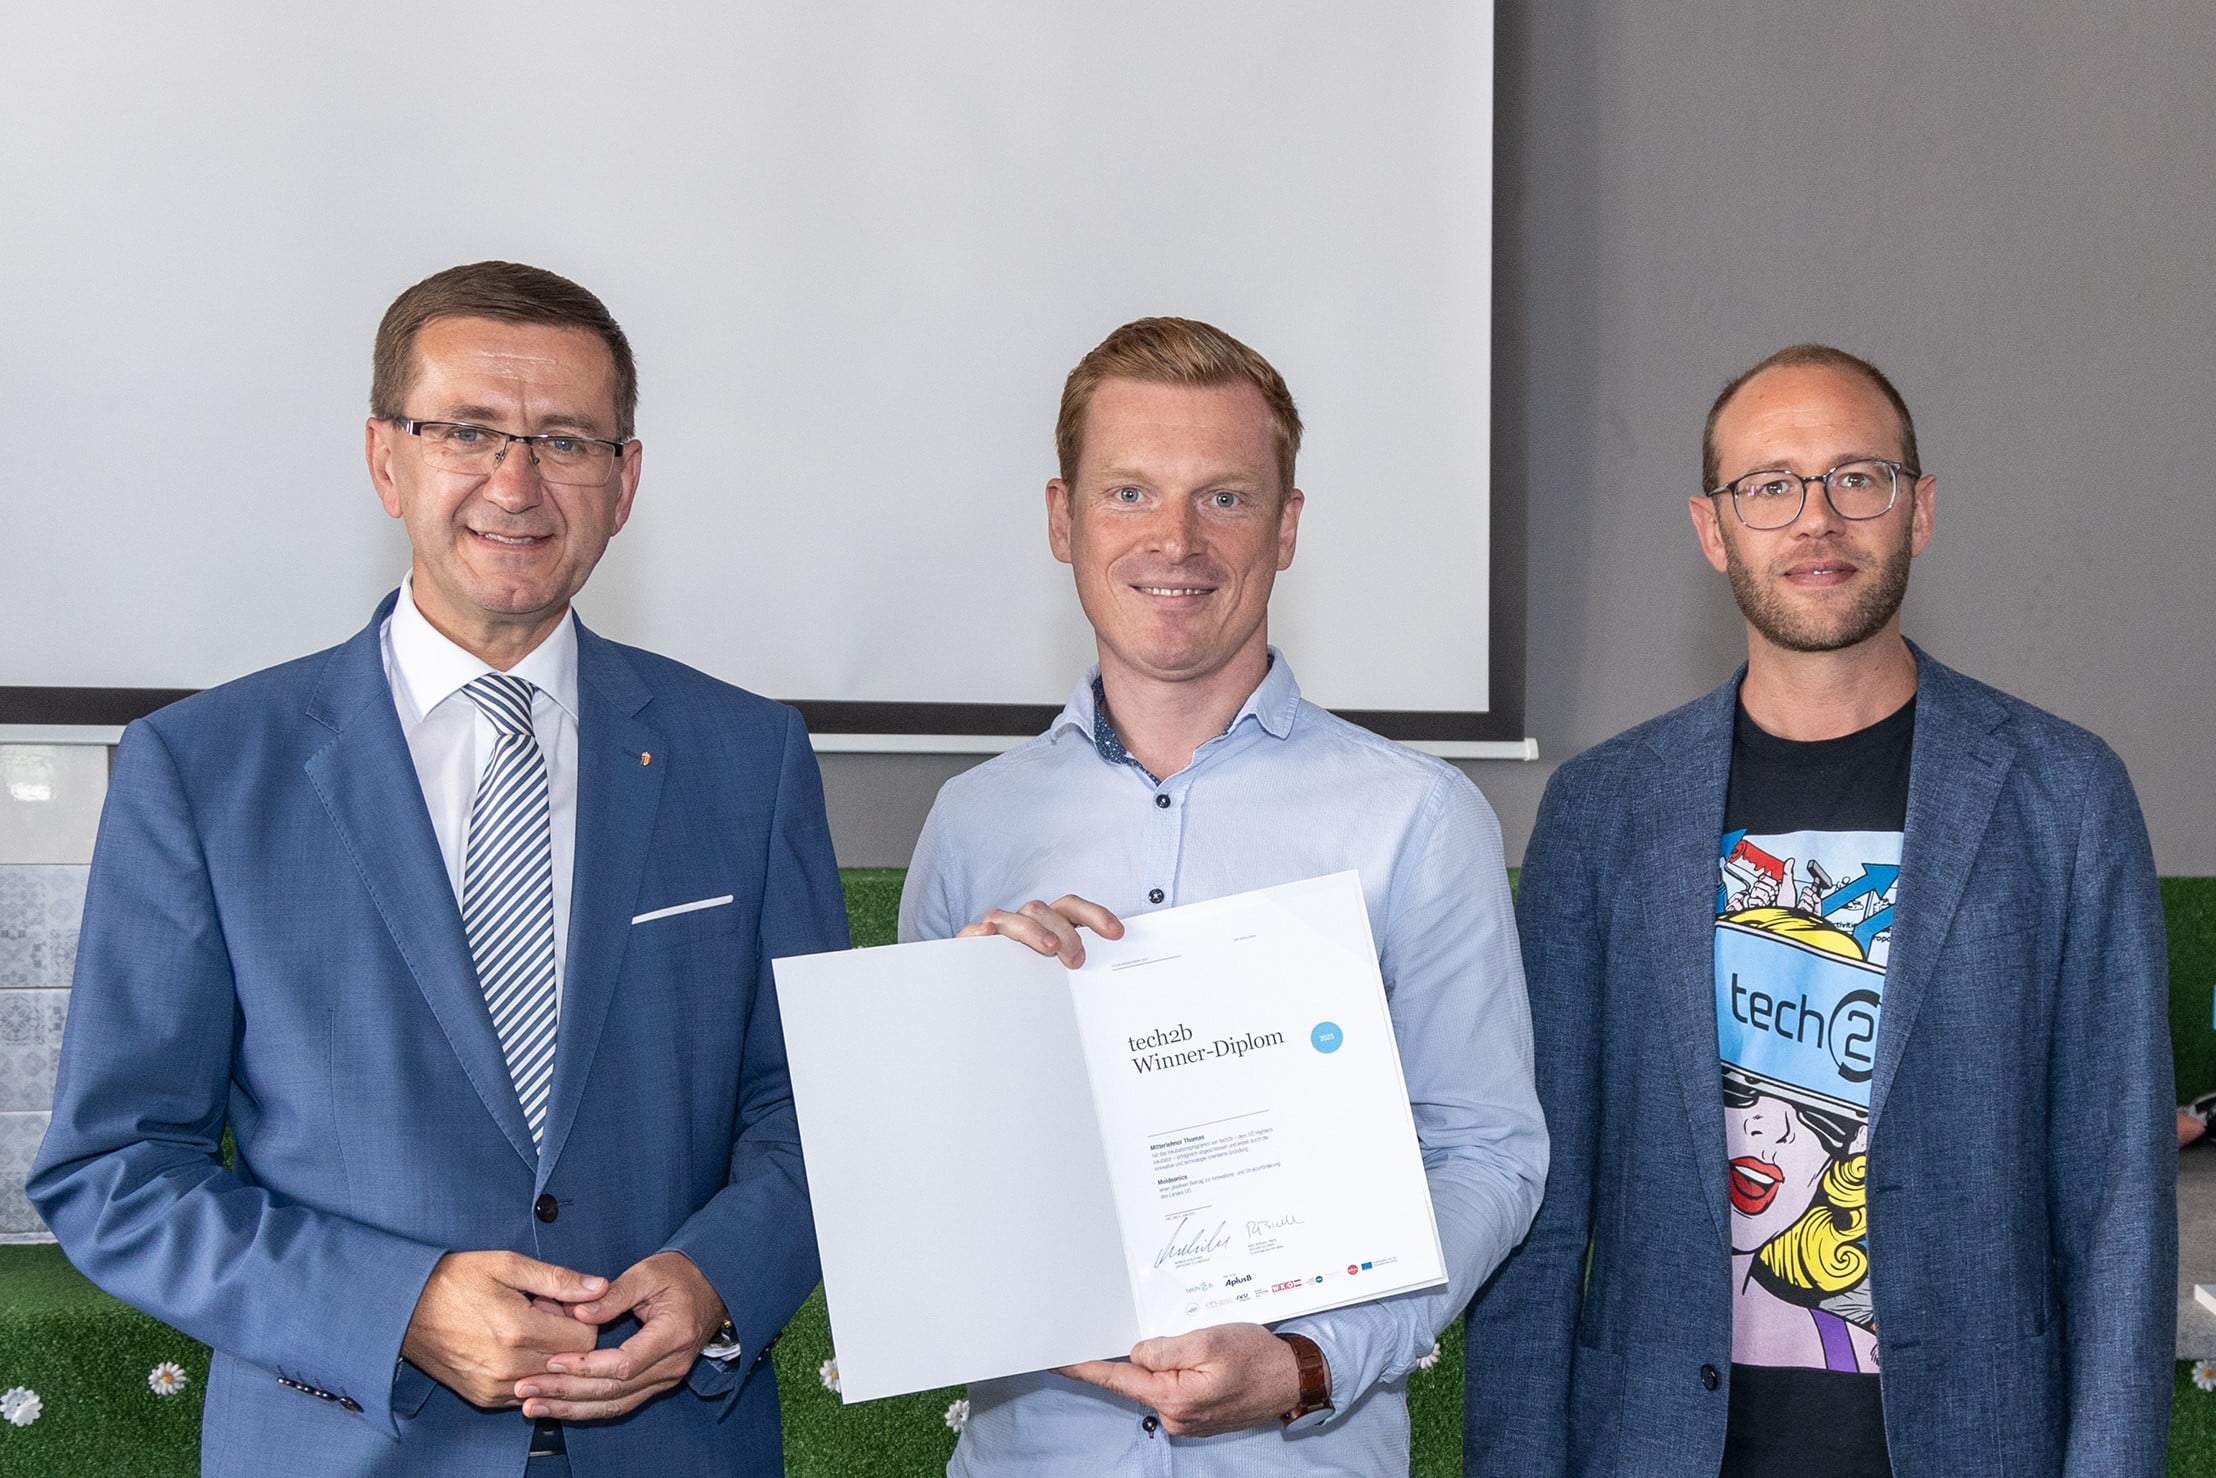 Regional Minister for Economic Affairs Achleitner presents Winner diploma from tech2b to Moldsonics